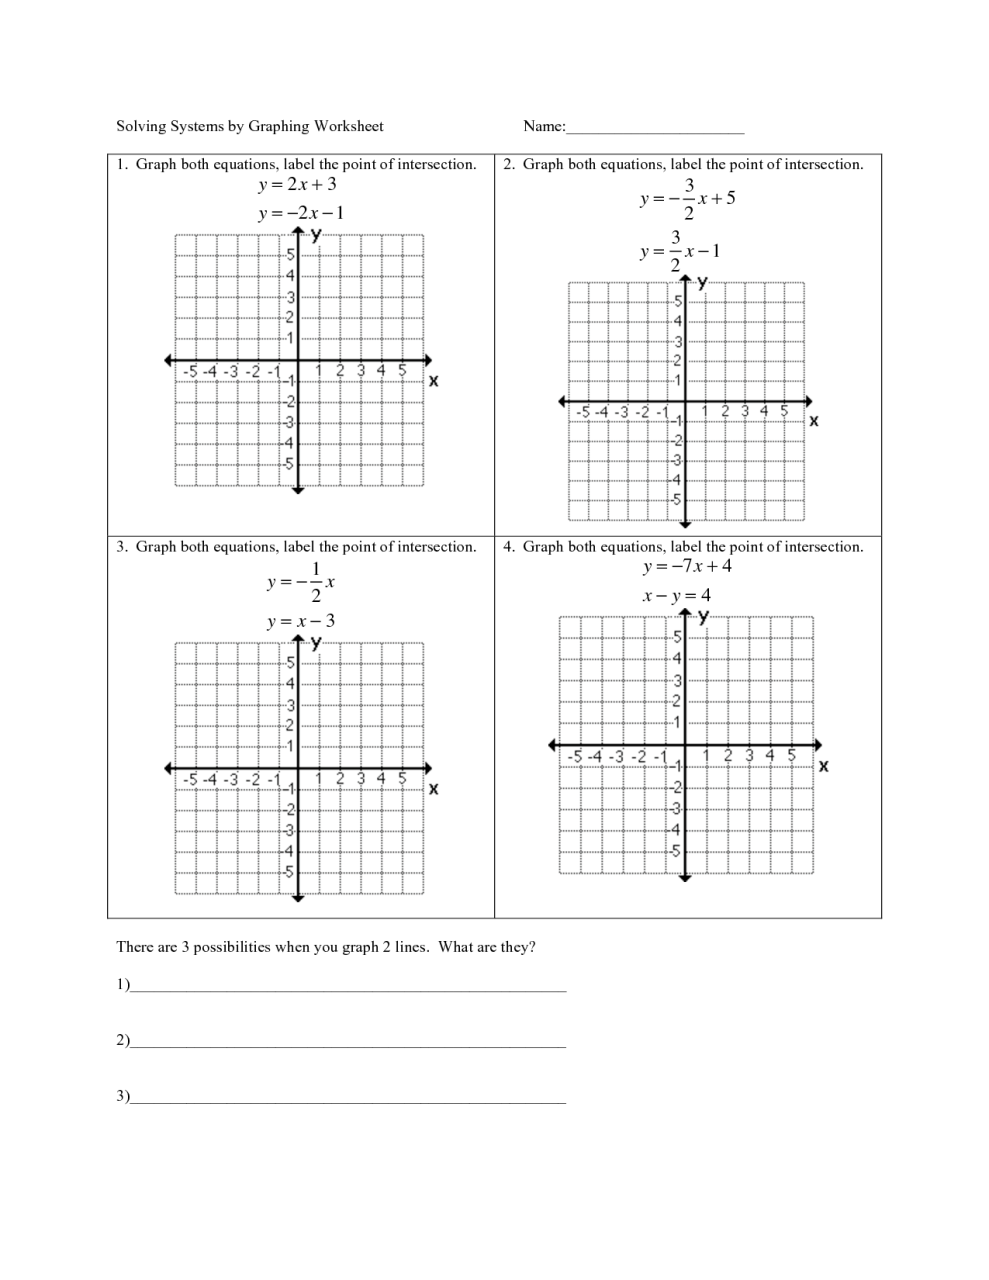 Solving Systems Of Equations By Graphing Worksheet Key